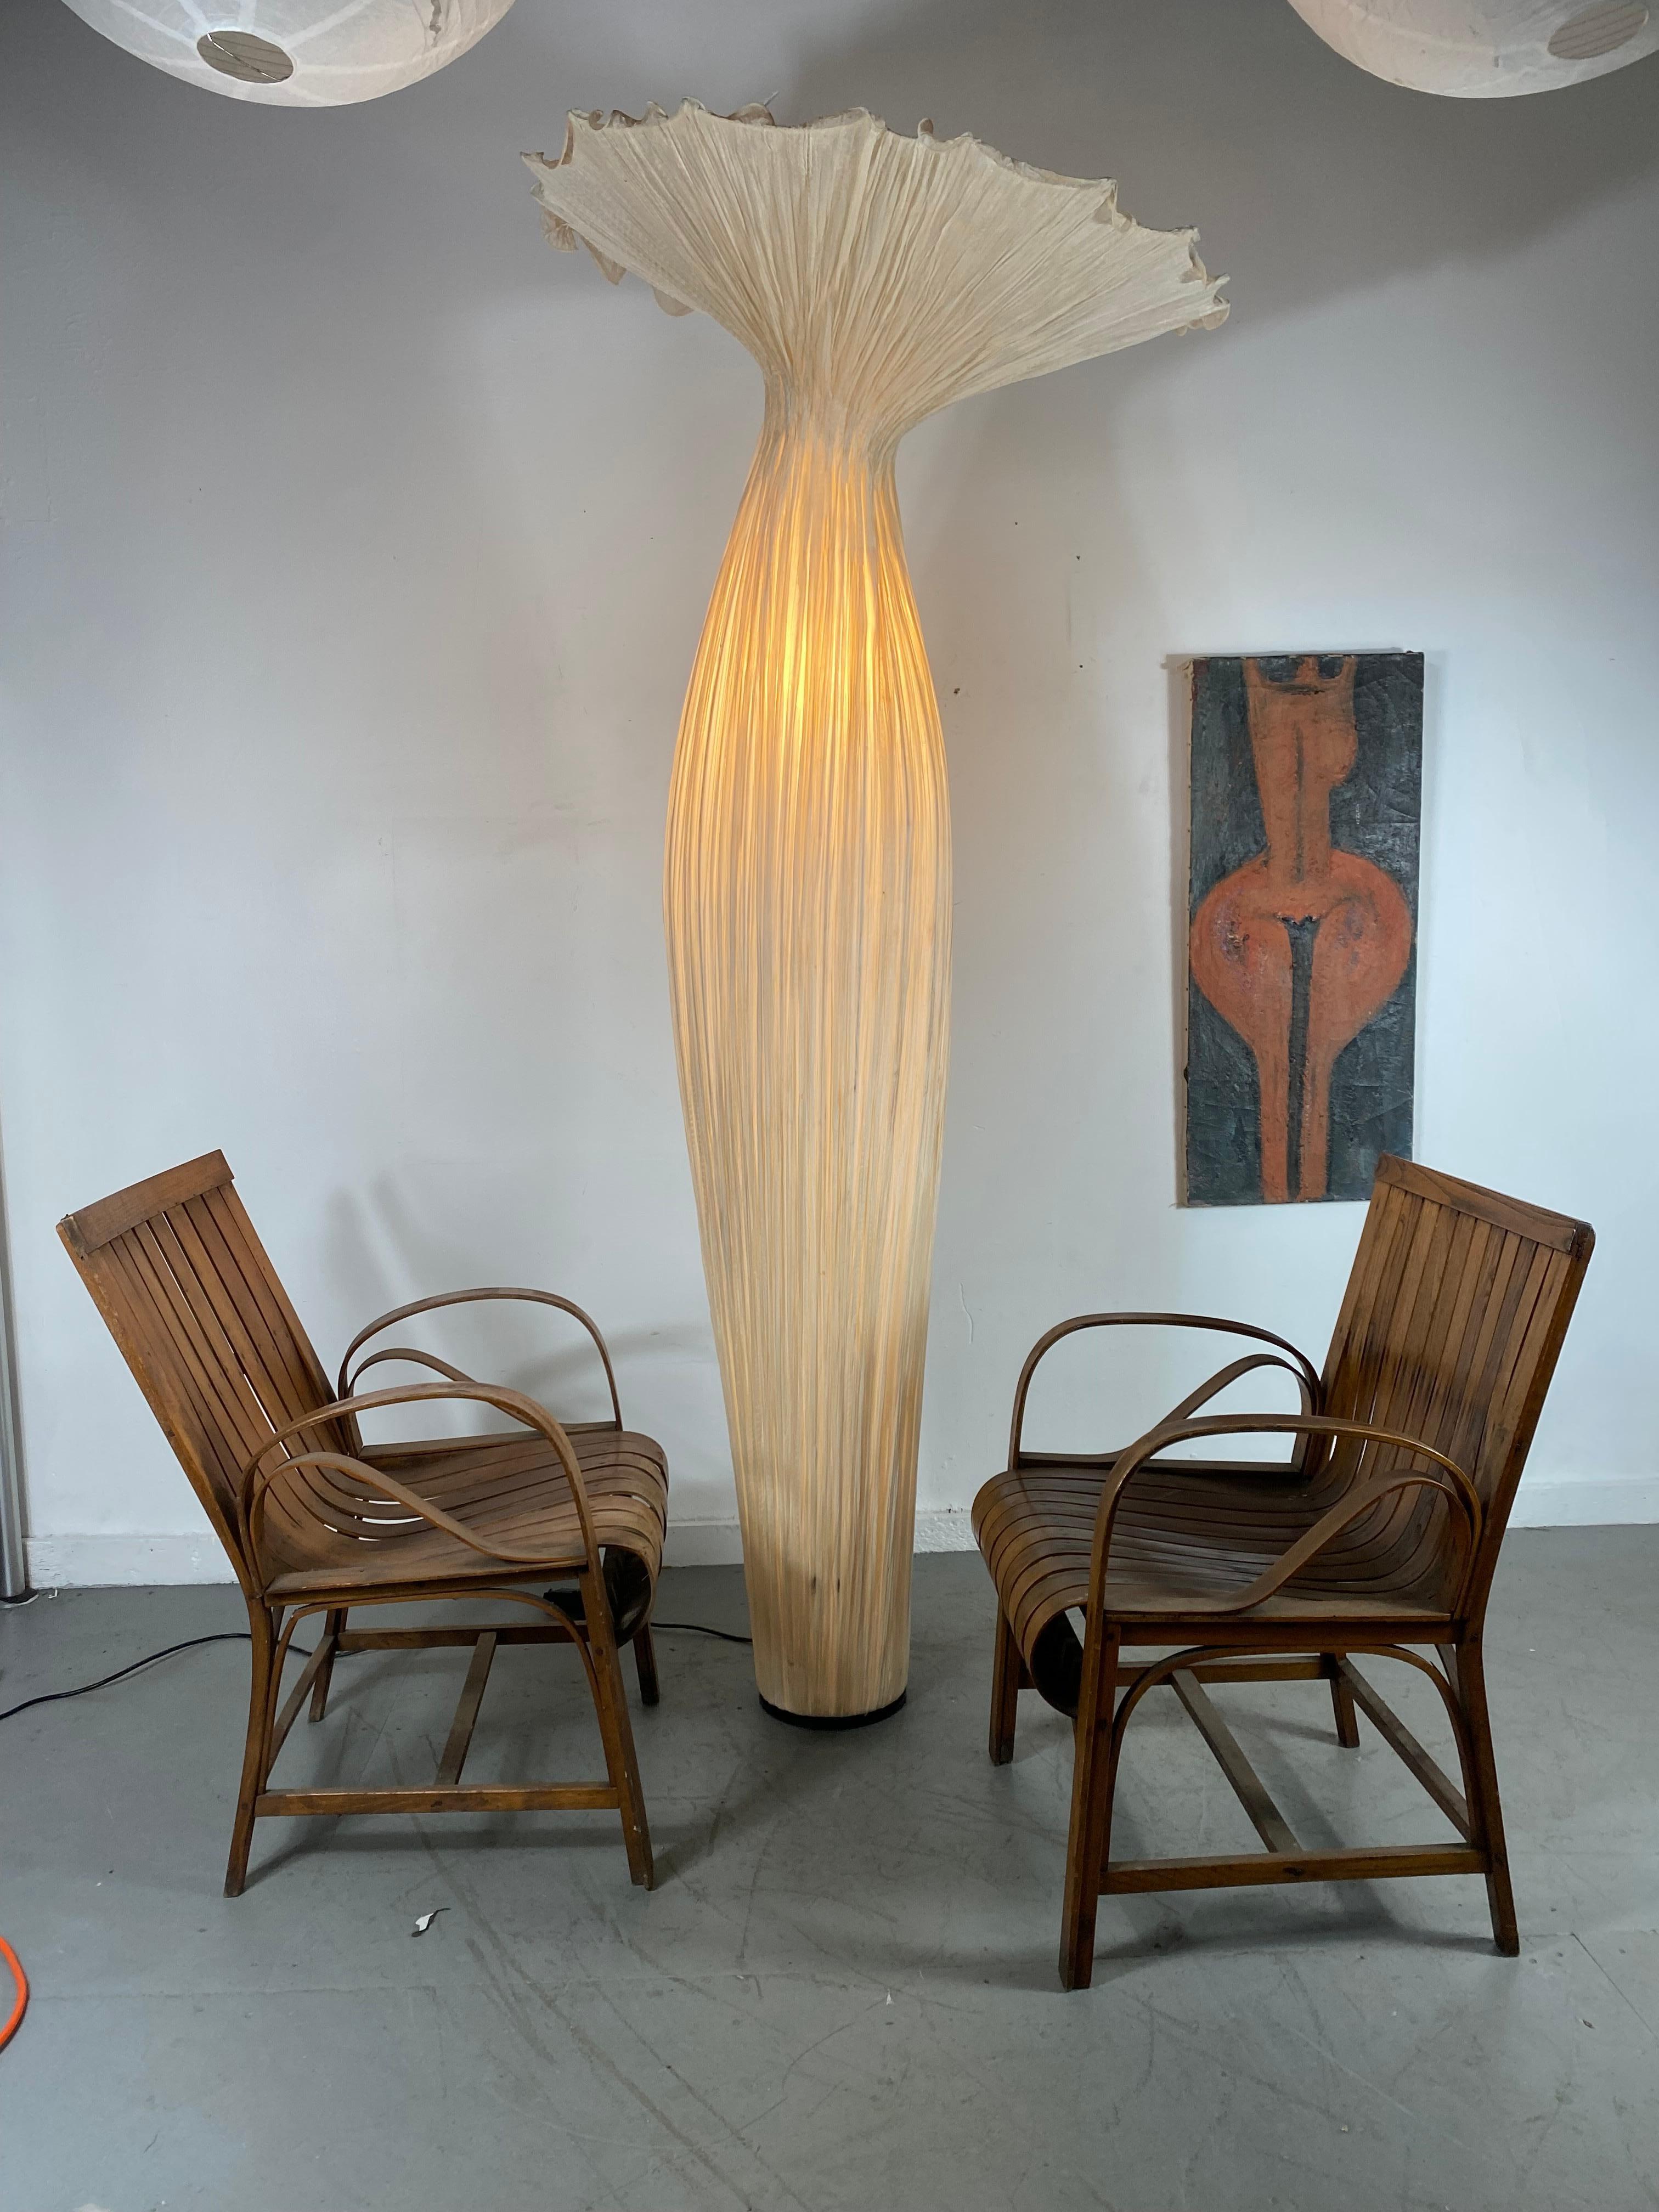 Stunning organic floor lamp made by Aqua Creations, illuminated sculpture !, elegant flowing design made by hand of crushed silk and metal. It casts a soft, dream-like glow from its silk shades that brings distinction to any interior., minor